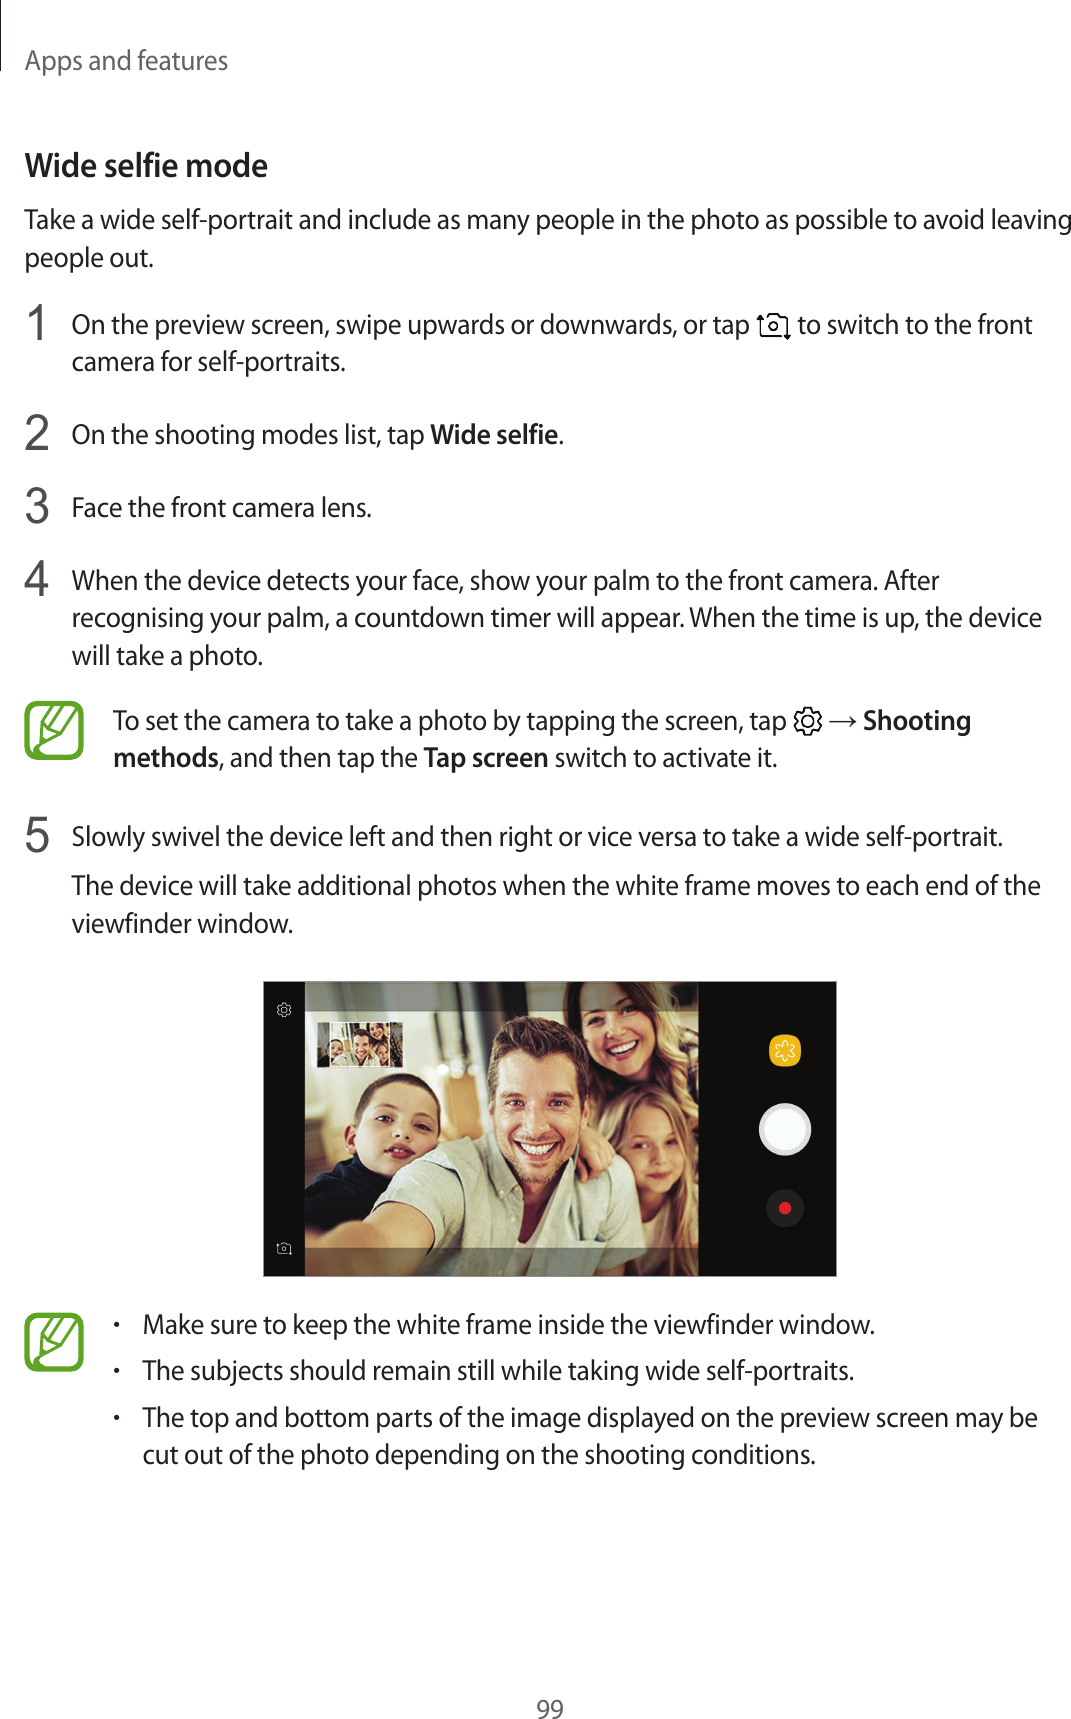 Apps and features99Wide selfie modeTake a wide self-portrait and include as many people in the photo as possible to avoid leaving people out.1  On the preview screen, swipe upwards or downwards, or tap   to switch to the front camera for self-portraits.2  On the shooting modes list, tap Wide selfie.3  Face the front camera lens.4  When the device detects your face, show your palm to the front camera. After recognising your palm, a countdown timer will appear. When the time is up, the device will take a photo.To set the camera to take a photo by tapping the screen, tap   → Shooting methods, and then tap the Tap screen switch to activate it.5  Slowly swivel the device left and then right or vice versa to take a wide self-portrait.The device will take additional photos when the white frame moves to each end of the viewfinder window.•Make sure to keep the white frame inside the viewfinder window.•The subjects should remain still while taking wide self-portraits.•The top and bottom parts of the image displayed on the preview screen may be cut out of the photo depending on the shooting conditions.